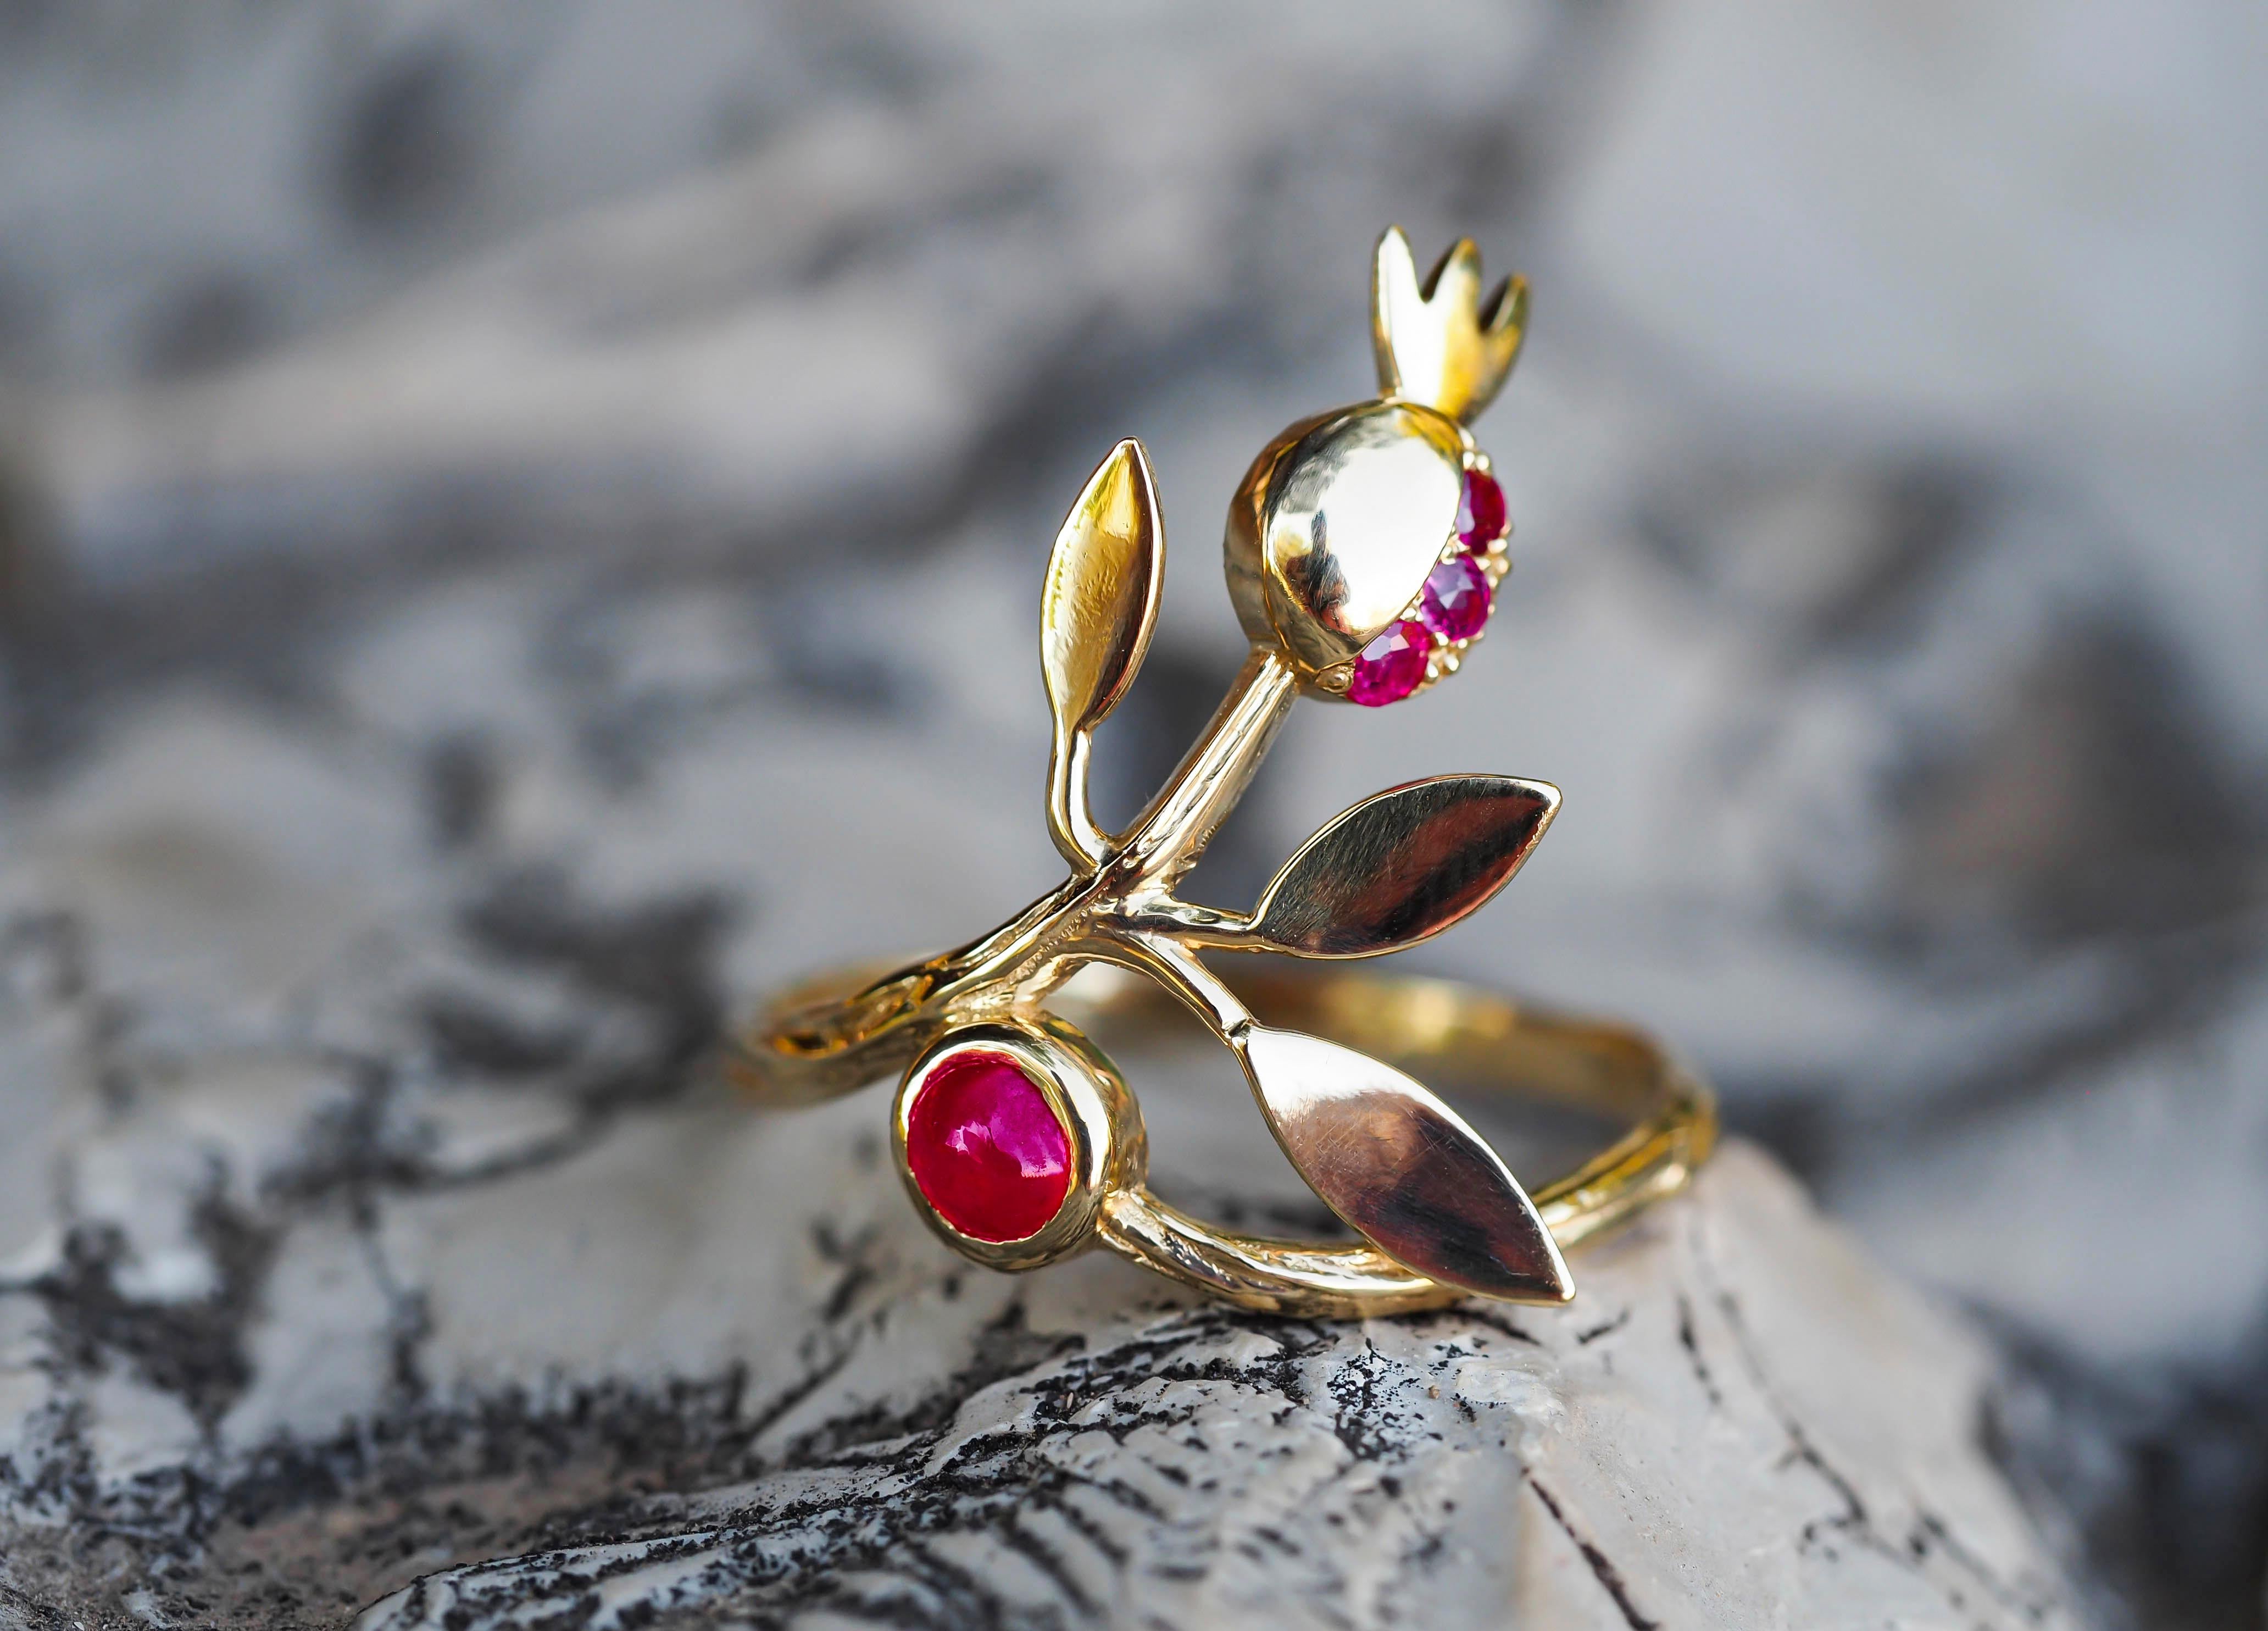 For Sale:  14 karat Gold Ring with Ruby, Sapphires. Pomegranate ring. July birthstone ring! 10